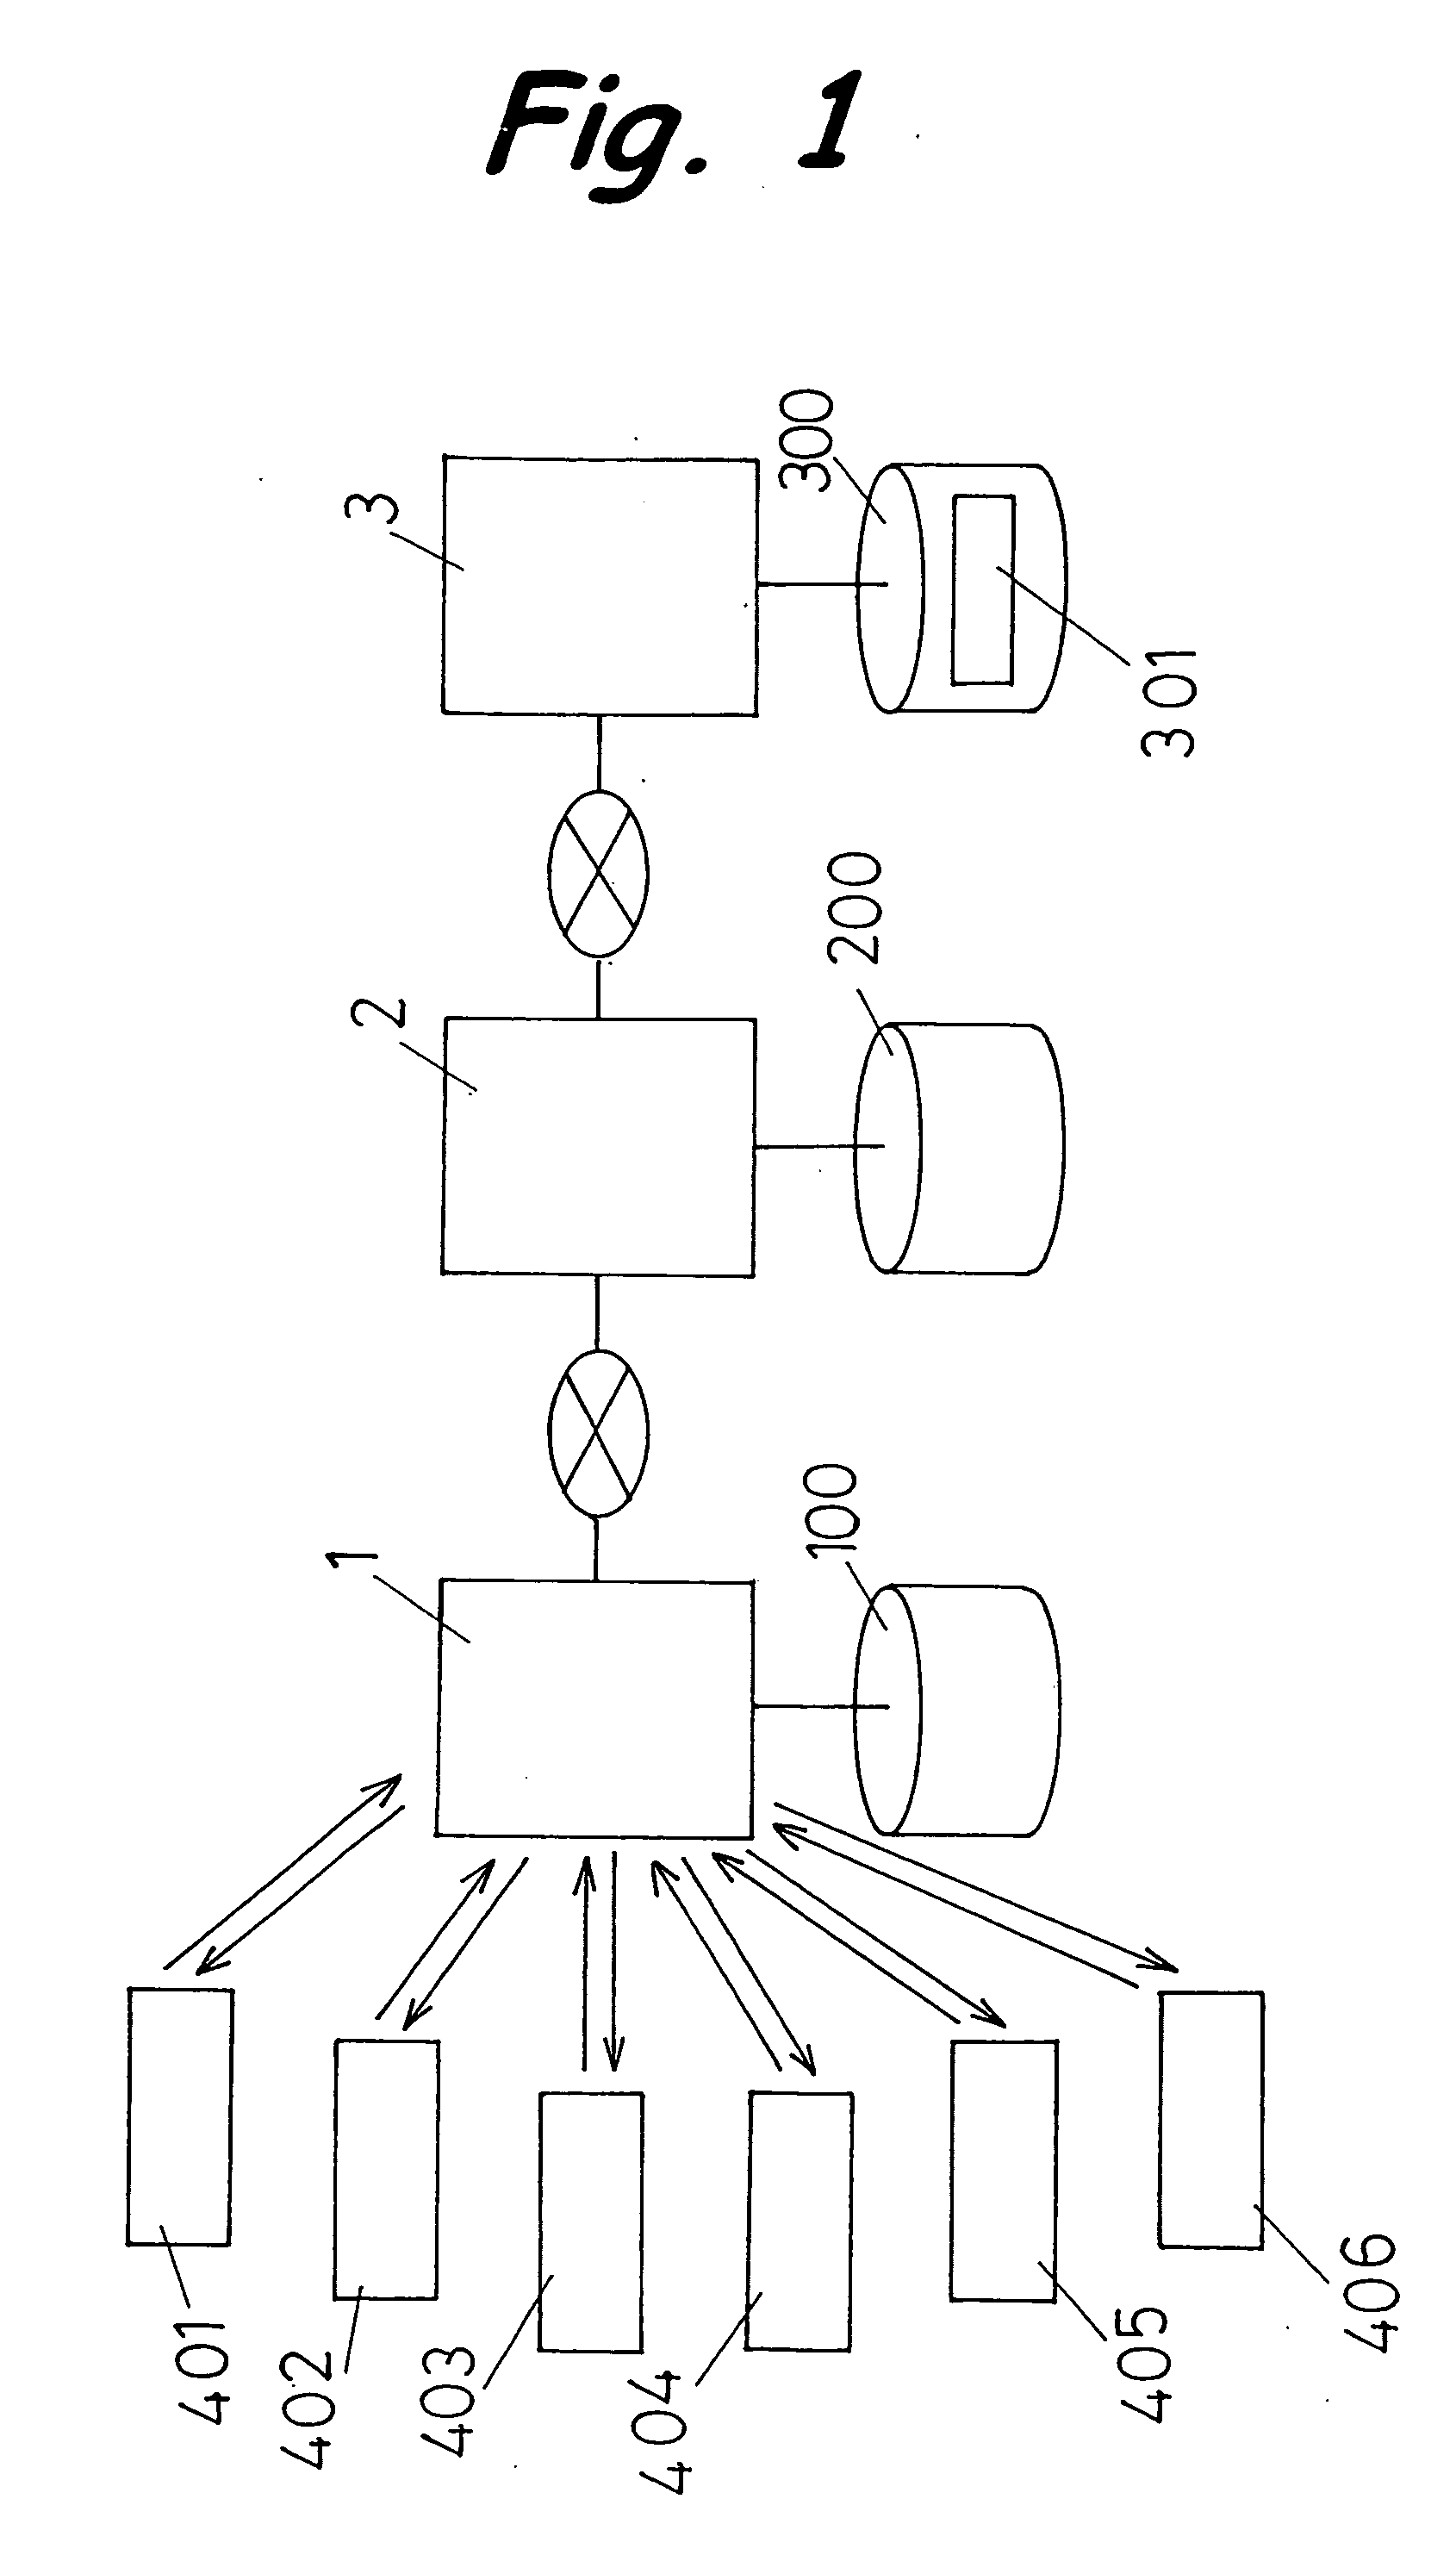 Server apparatus having function of creating website on which advertisement information is automatically displayed, and advertisement information providing system using the server apparatus